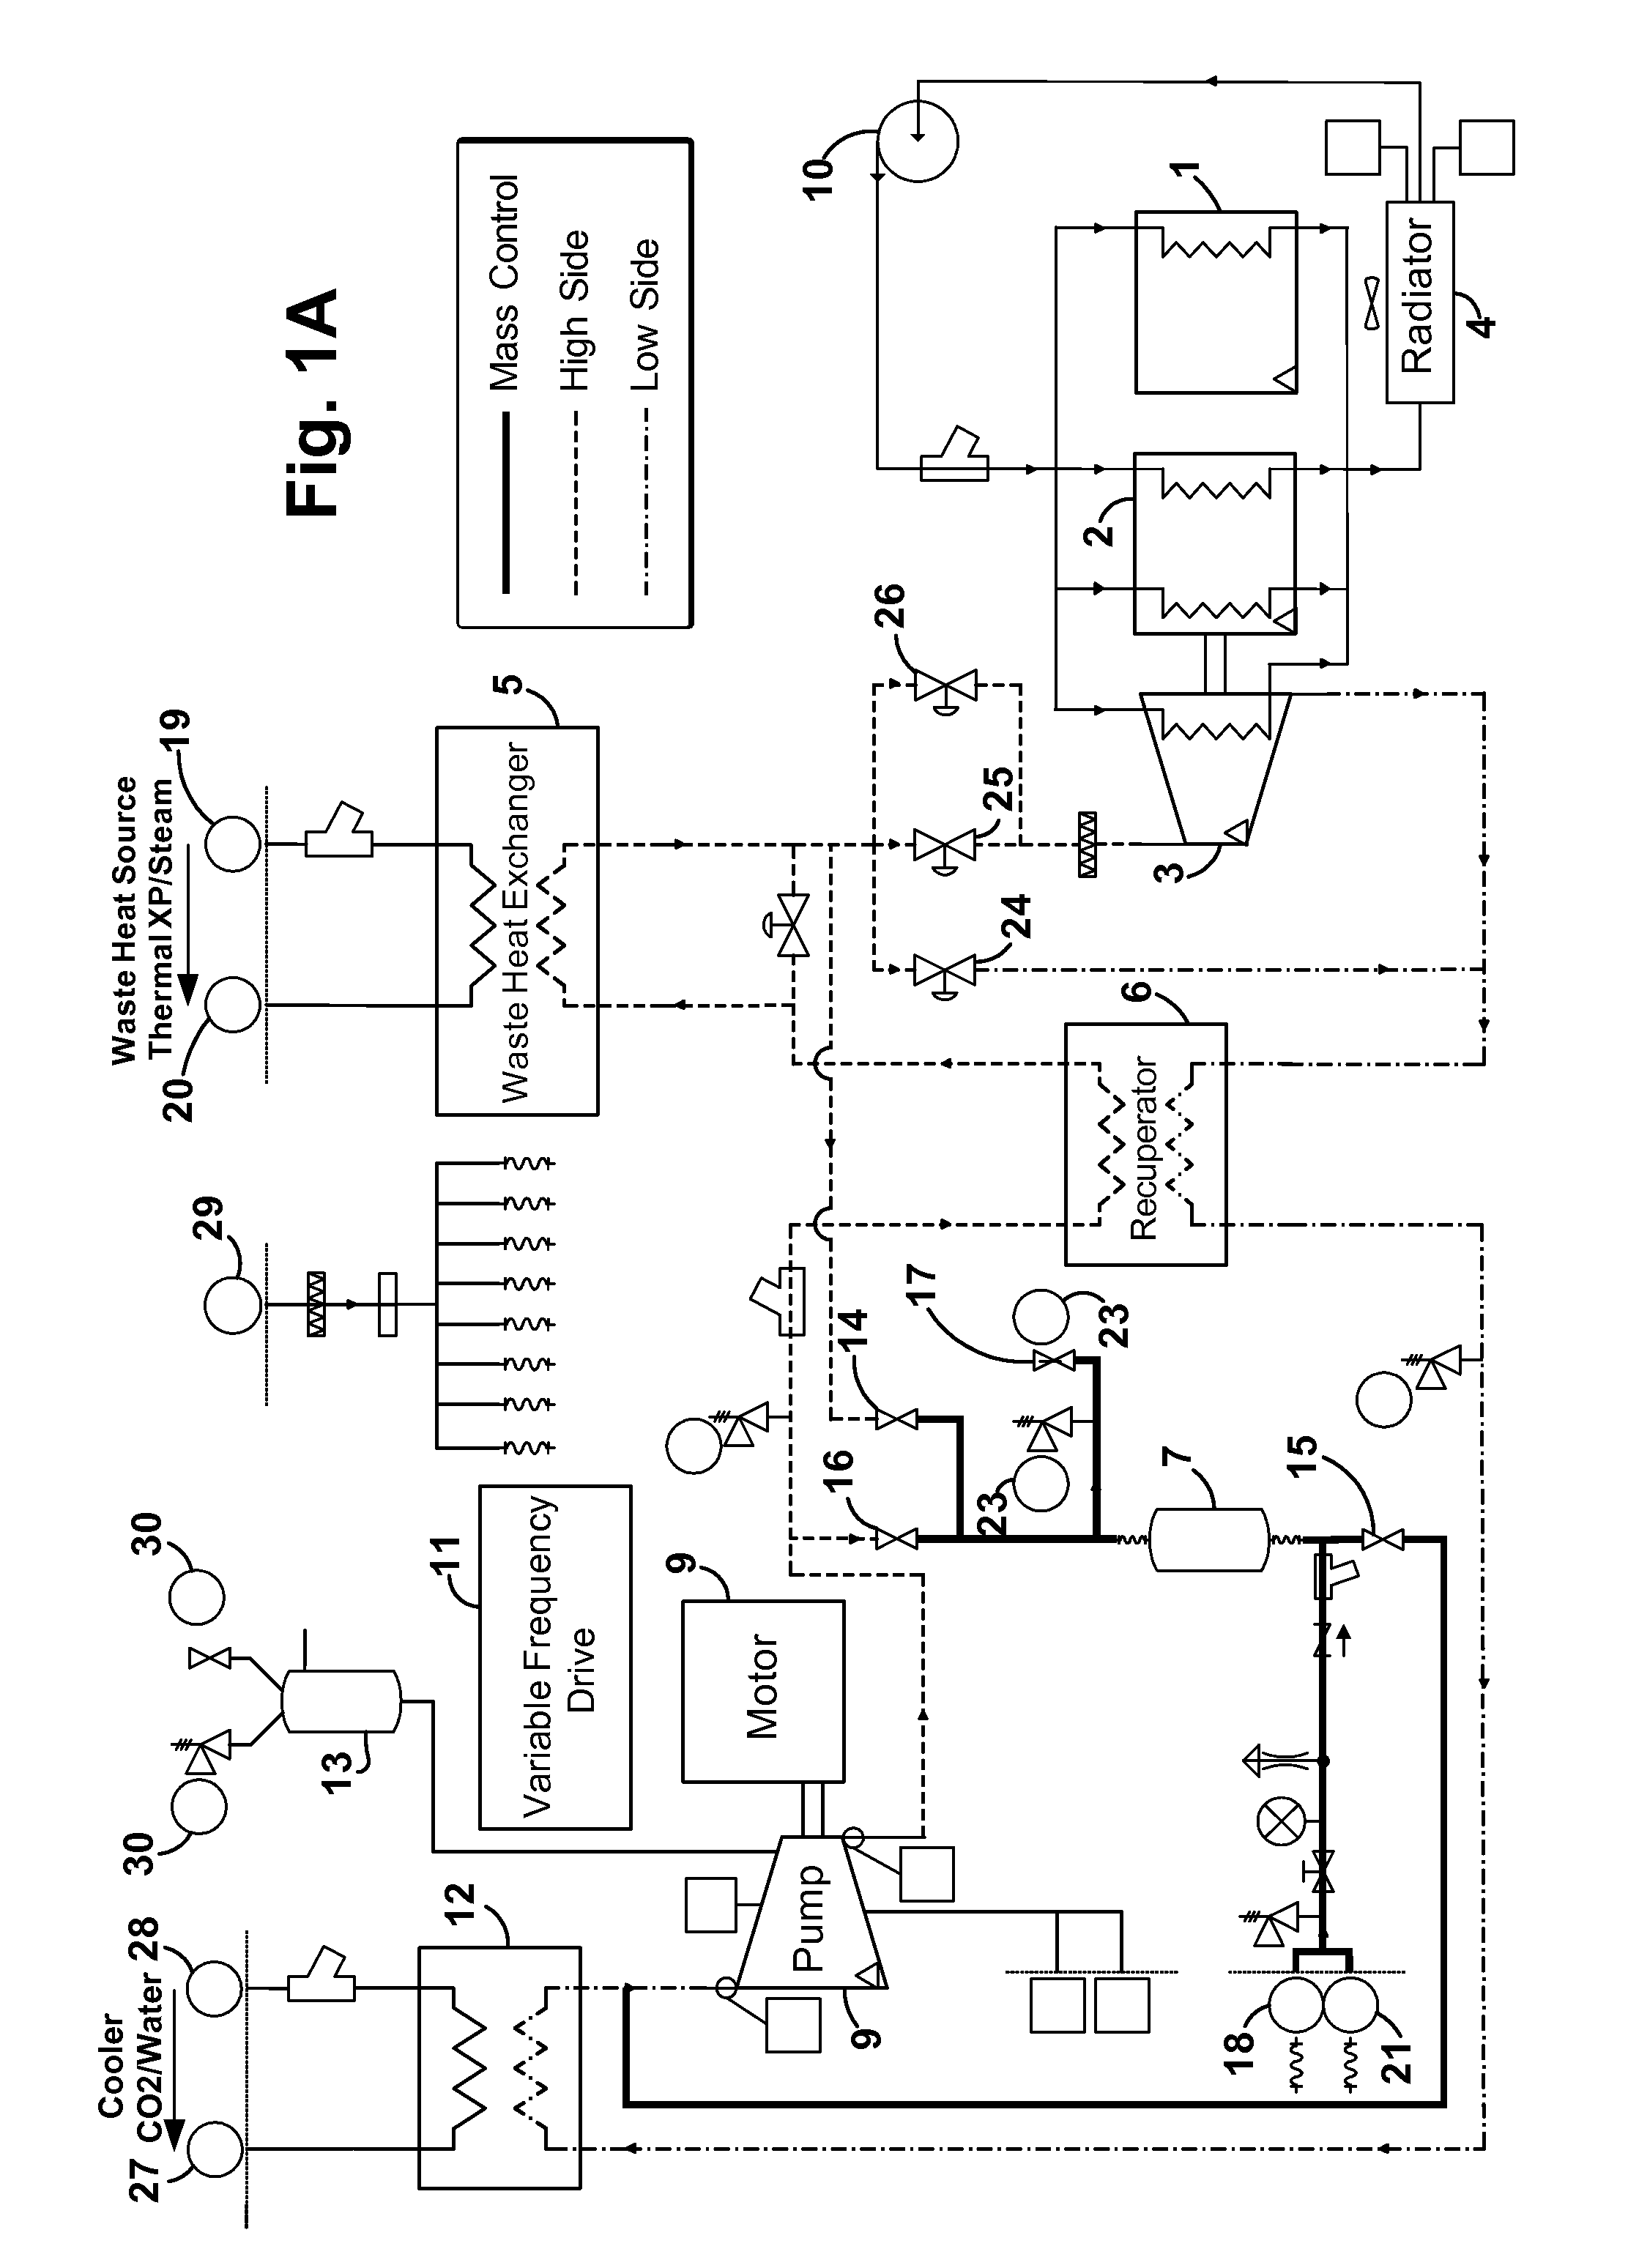 Heat engine and heat to electricity systems and methods